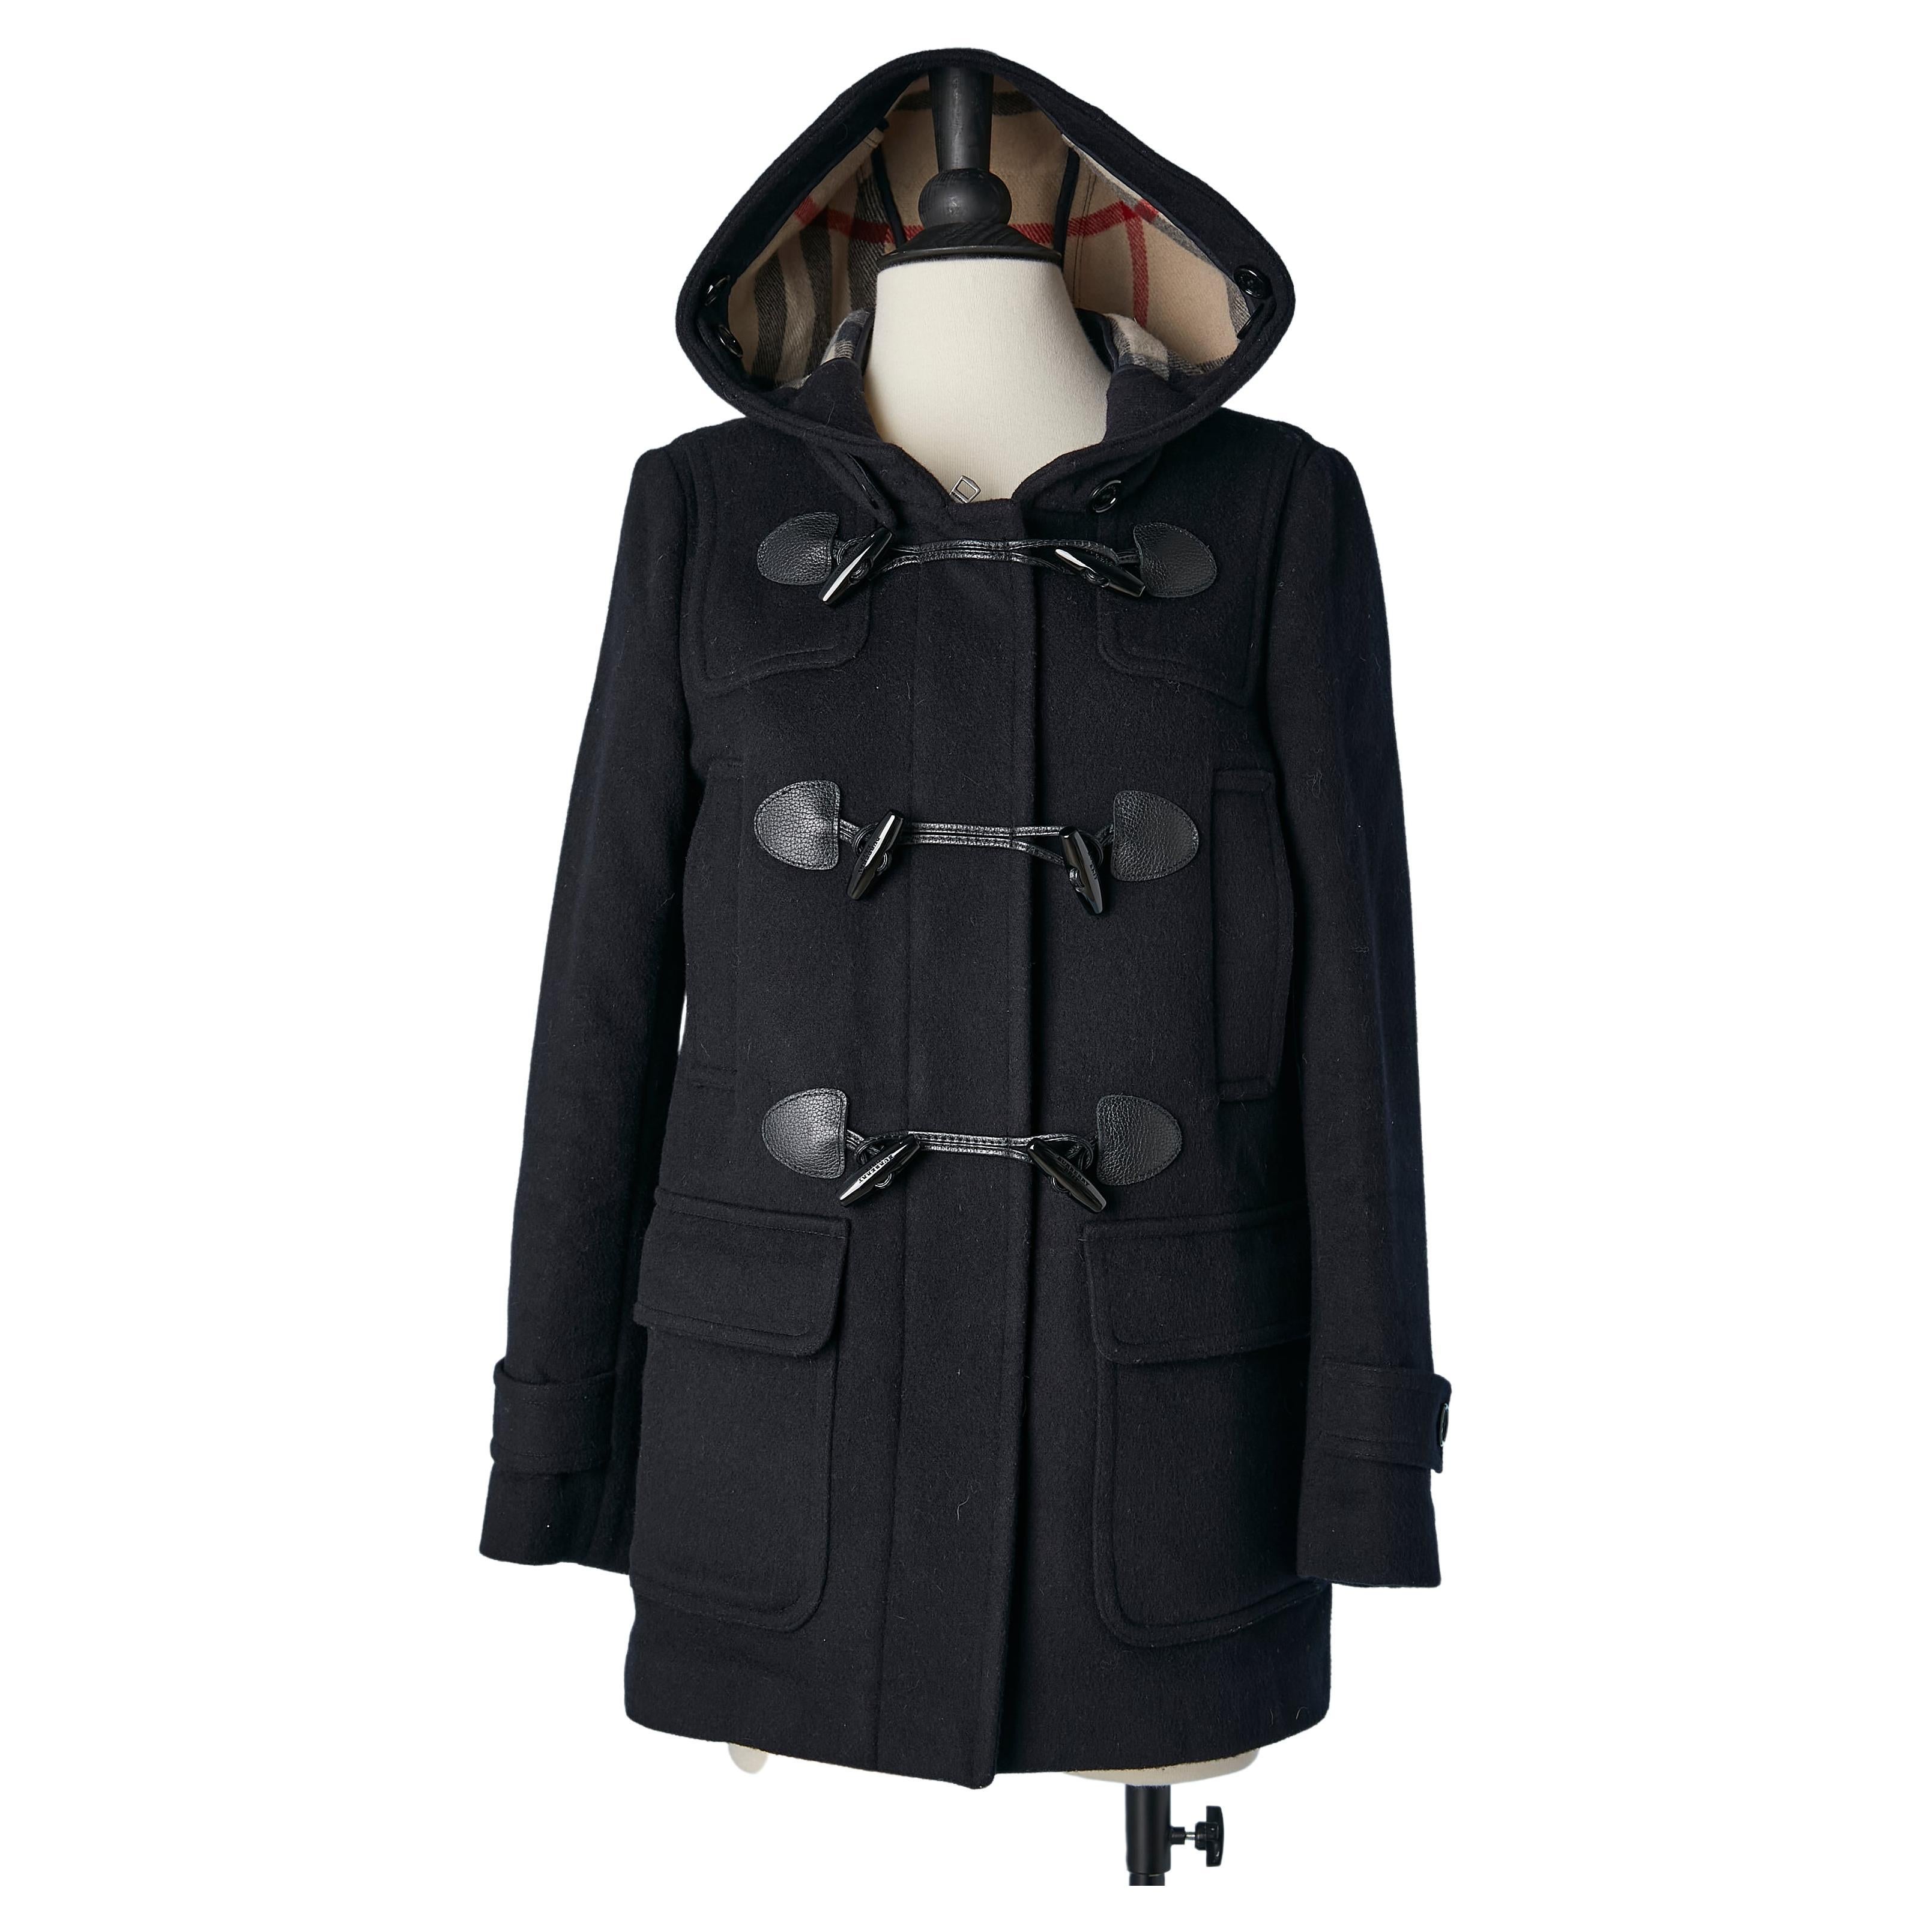 Navy blue wool duffle-coat with Tartan lining and hood Burberry Brit 